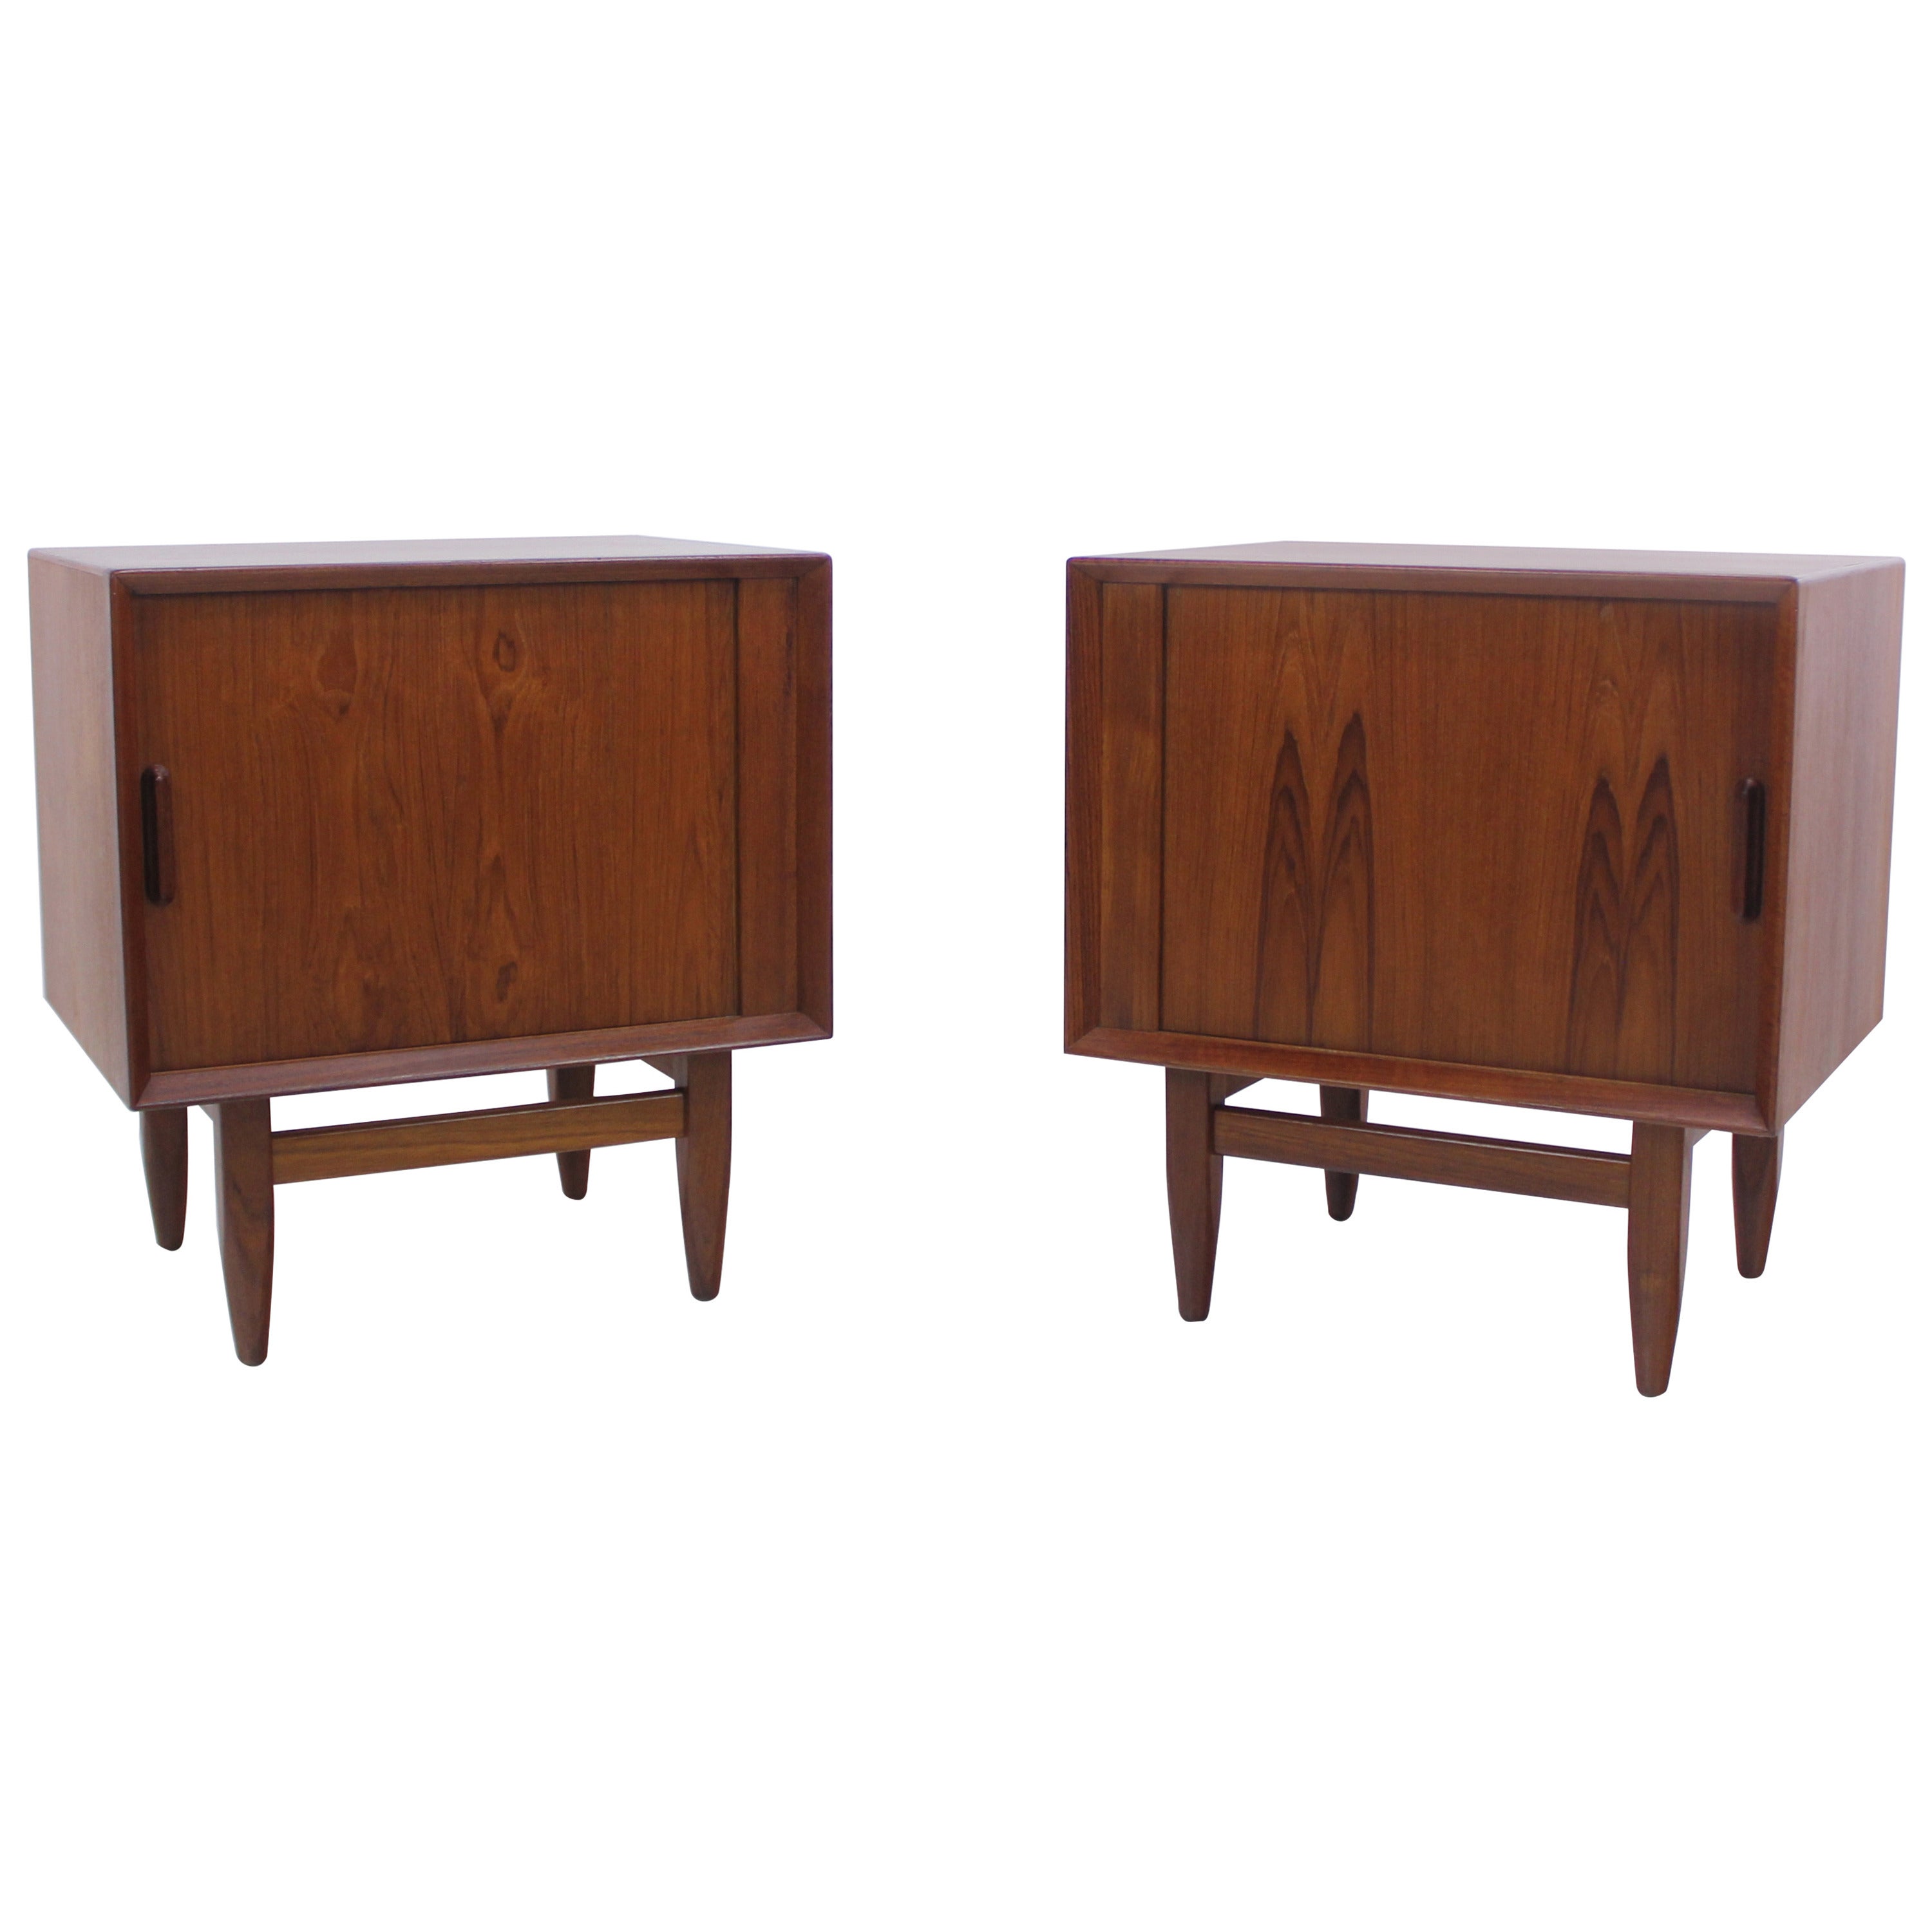 Pair of Danish Modern Teak Nightstands with Tambour Doors by Falster For Sale